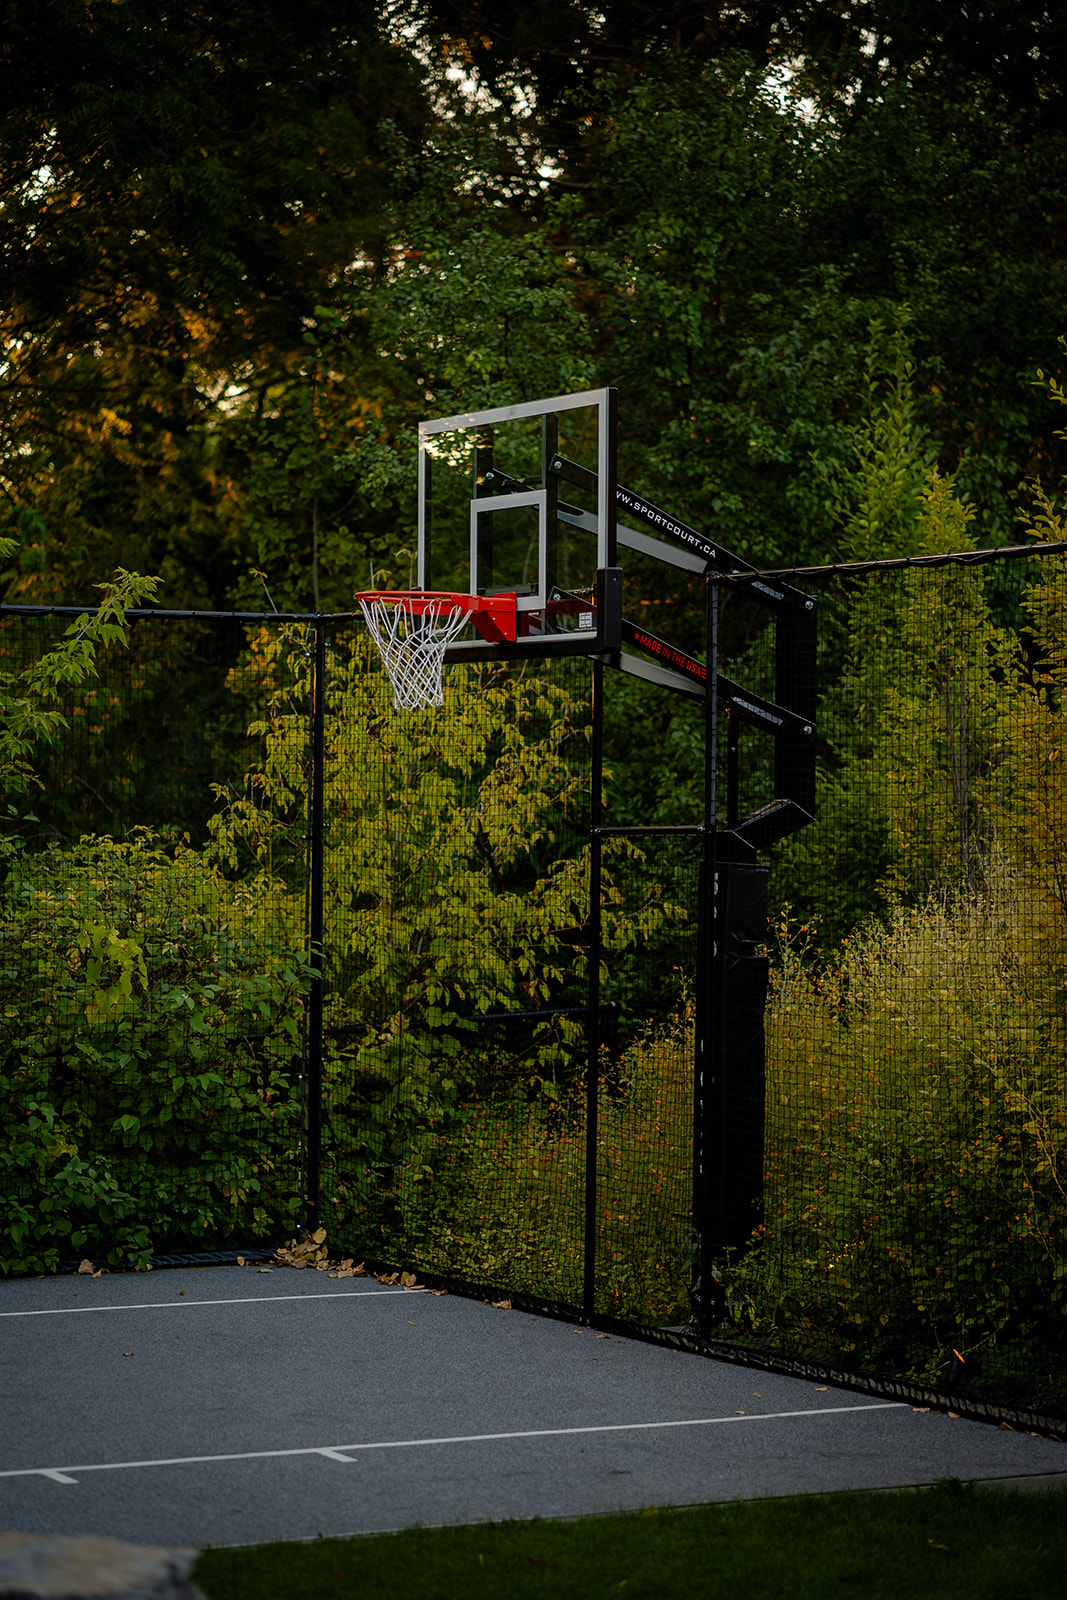 A basketball net along the fence of the property.